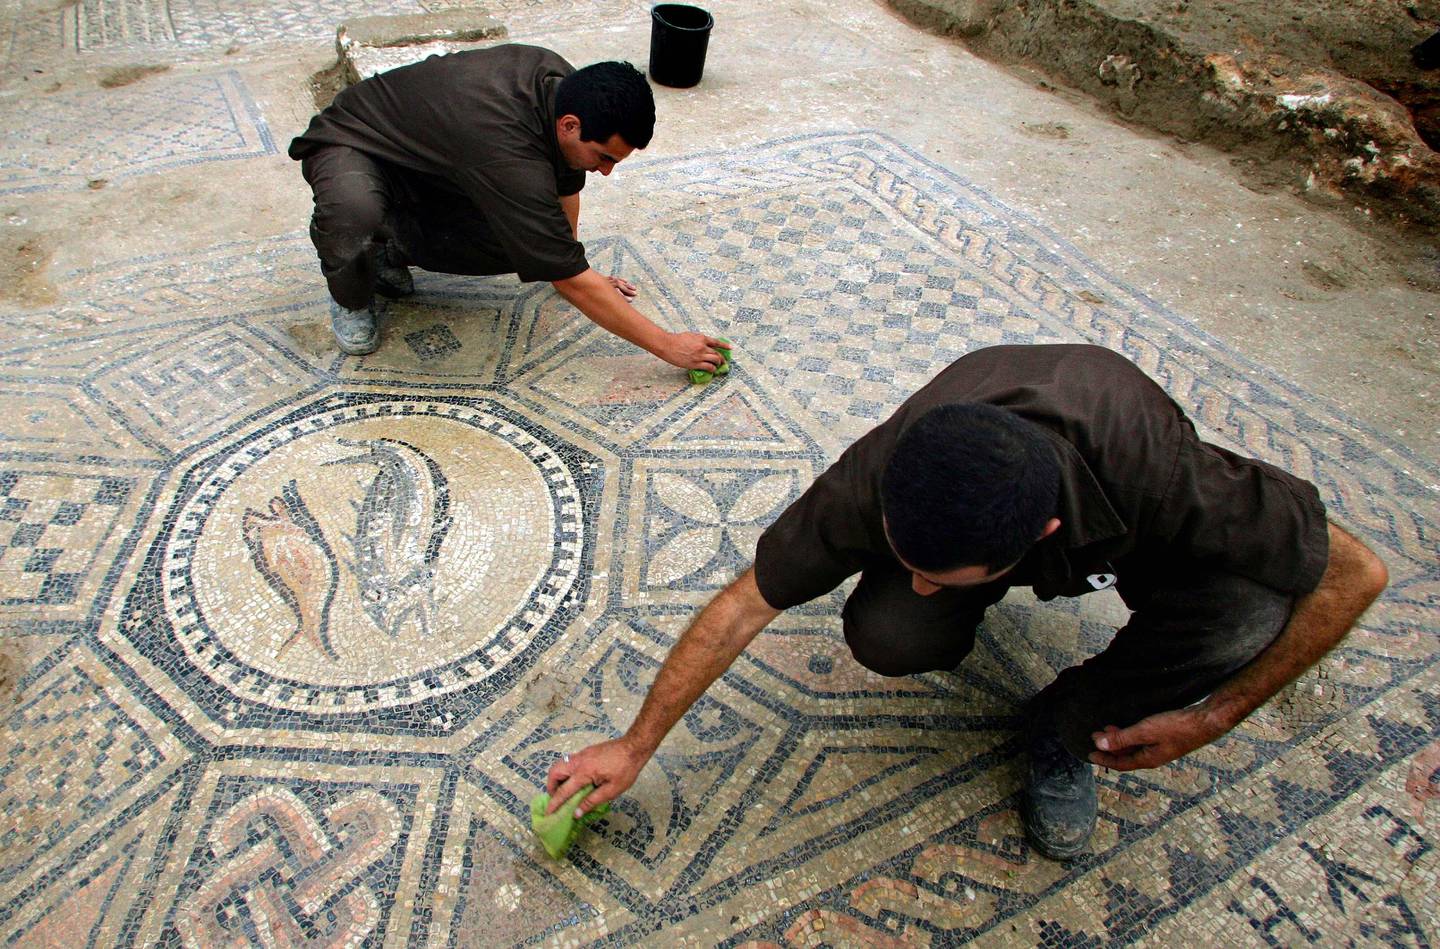 ** CAPTION CORRECTION, CORRECTS NAME OF PRISONER TO RAMIL RAZILO, NOT RIZLOV RAMIL AND MEIMON BITON, NOT BITON MAYMON ** Israeli prisoners Ramil Razilo, top, and Meimon Biton, bottom, clean a section of a Christian mosaic floor dating to the third or fourth century A.D., in the compound of the Megiddo prison in northern Israel , Sunday  Nov. 6, 2005. Israeli archaeologists on Saturday said they have discovered what may be the oldest Christian church in the Holy Land on the grounds of a prison near the biblical site of Armageddon. The Israeli Antiquities Authority said the ruins are believed to date back to the third or fourth centuries, and include references to Jesus and images of fish, an ancient Christian symbol. (AP Photo/Ariel Schalit)